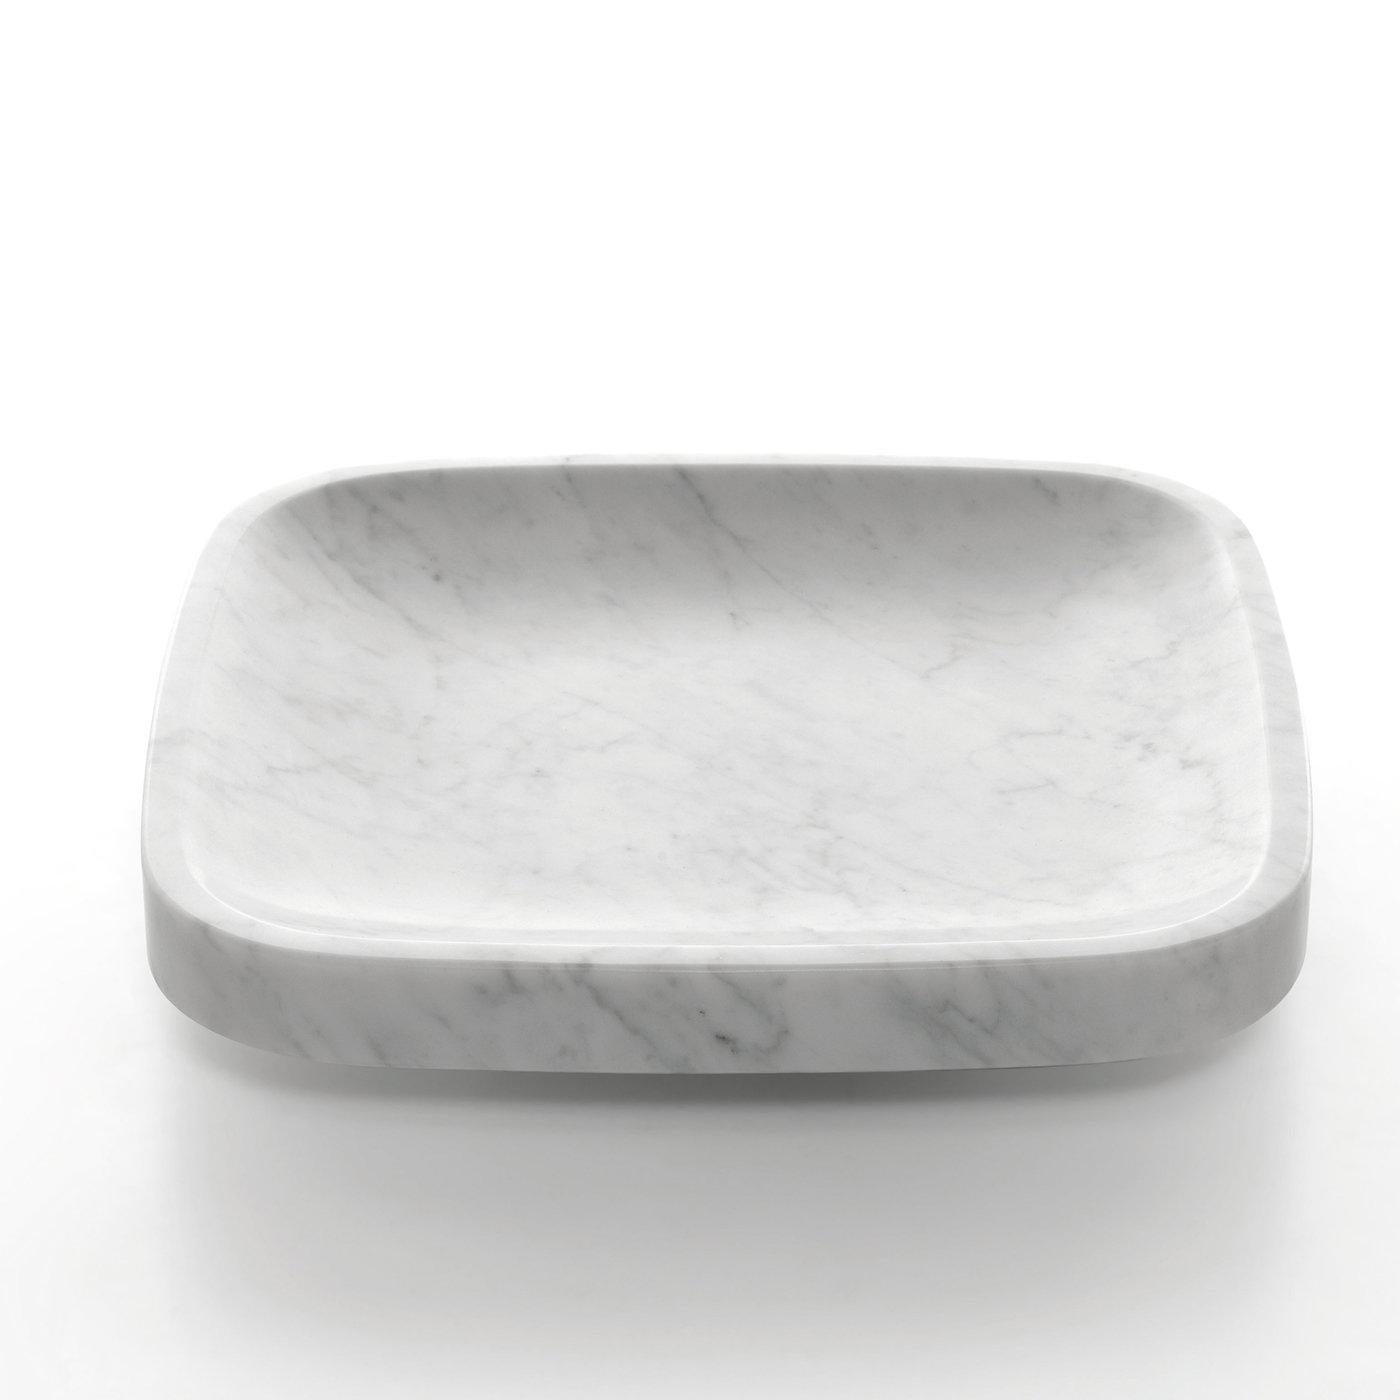 Fruit bowl, in white Carrara marble, matt polished finish also available in black Marquina marble, matt polished finish.

   